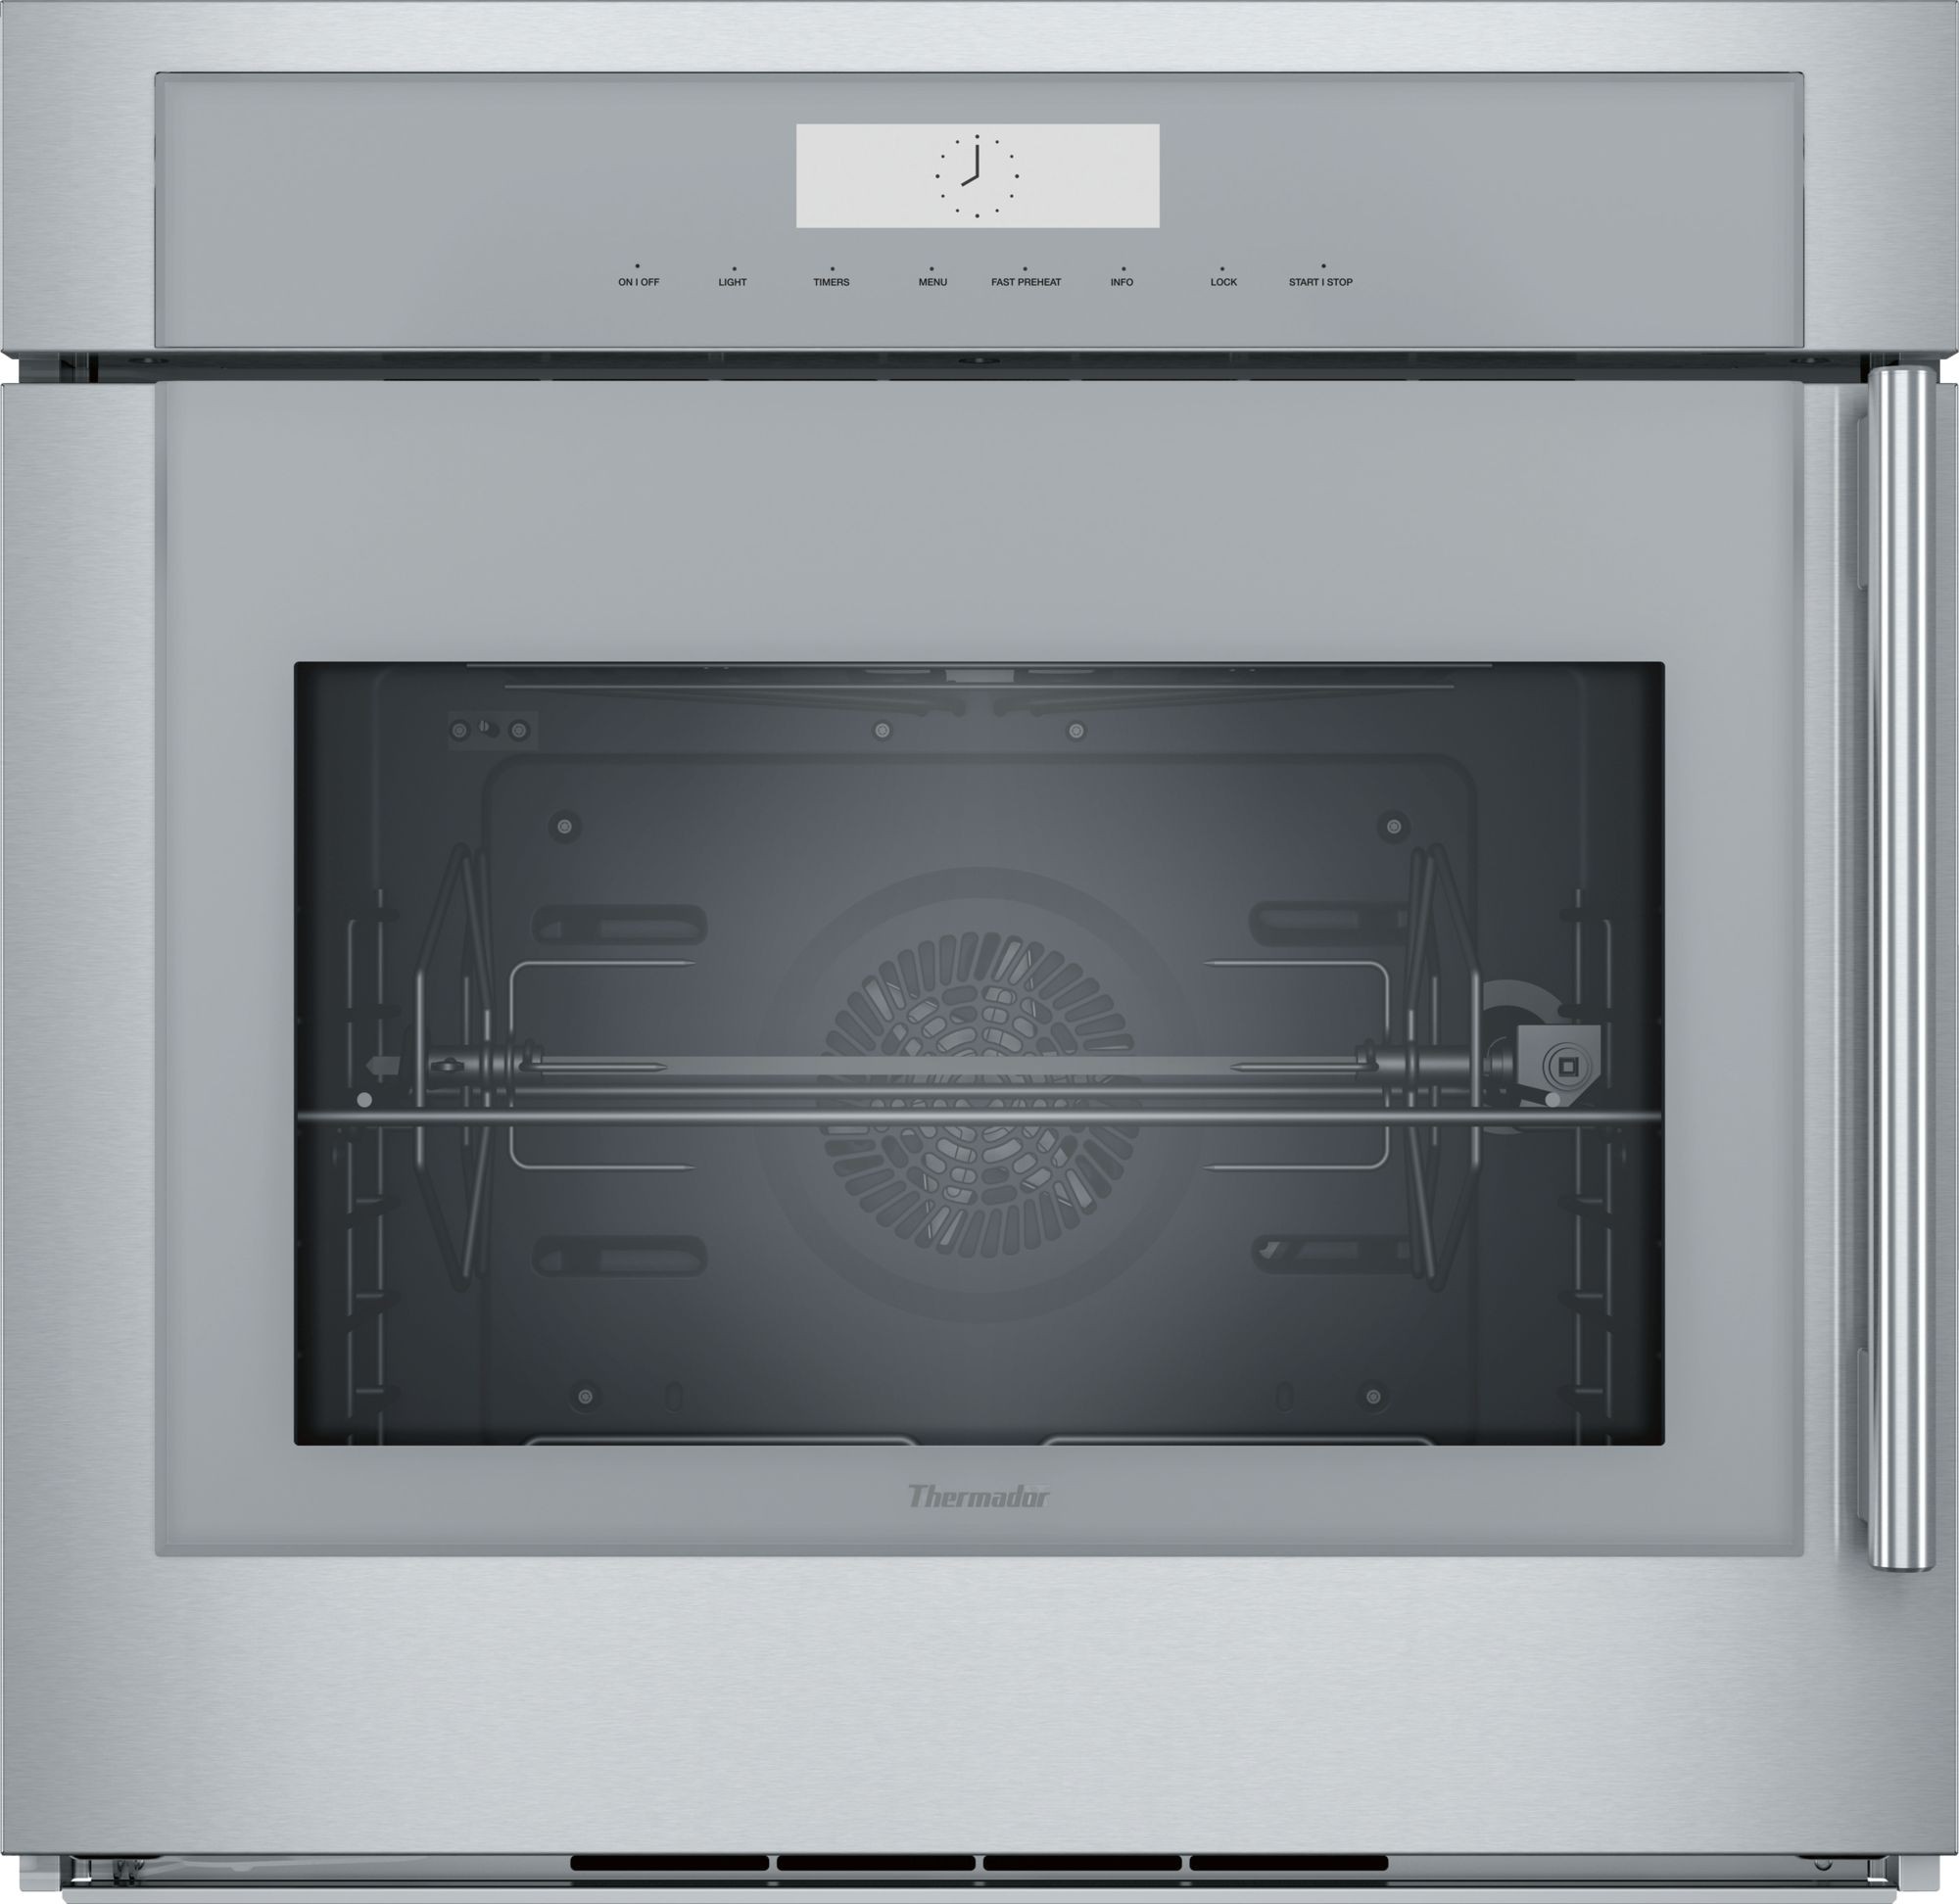 Thermador Masterpiece 30 Single Electric Wall Oven MED301LWS